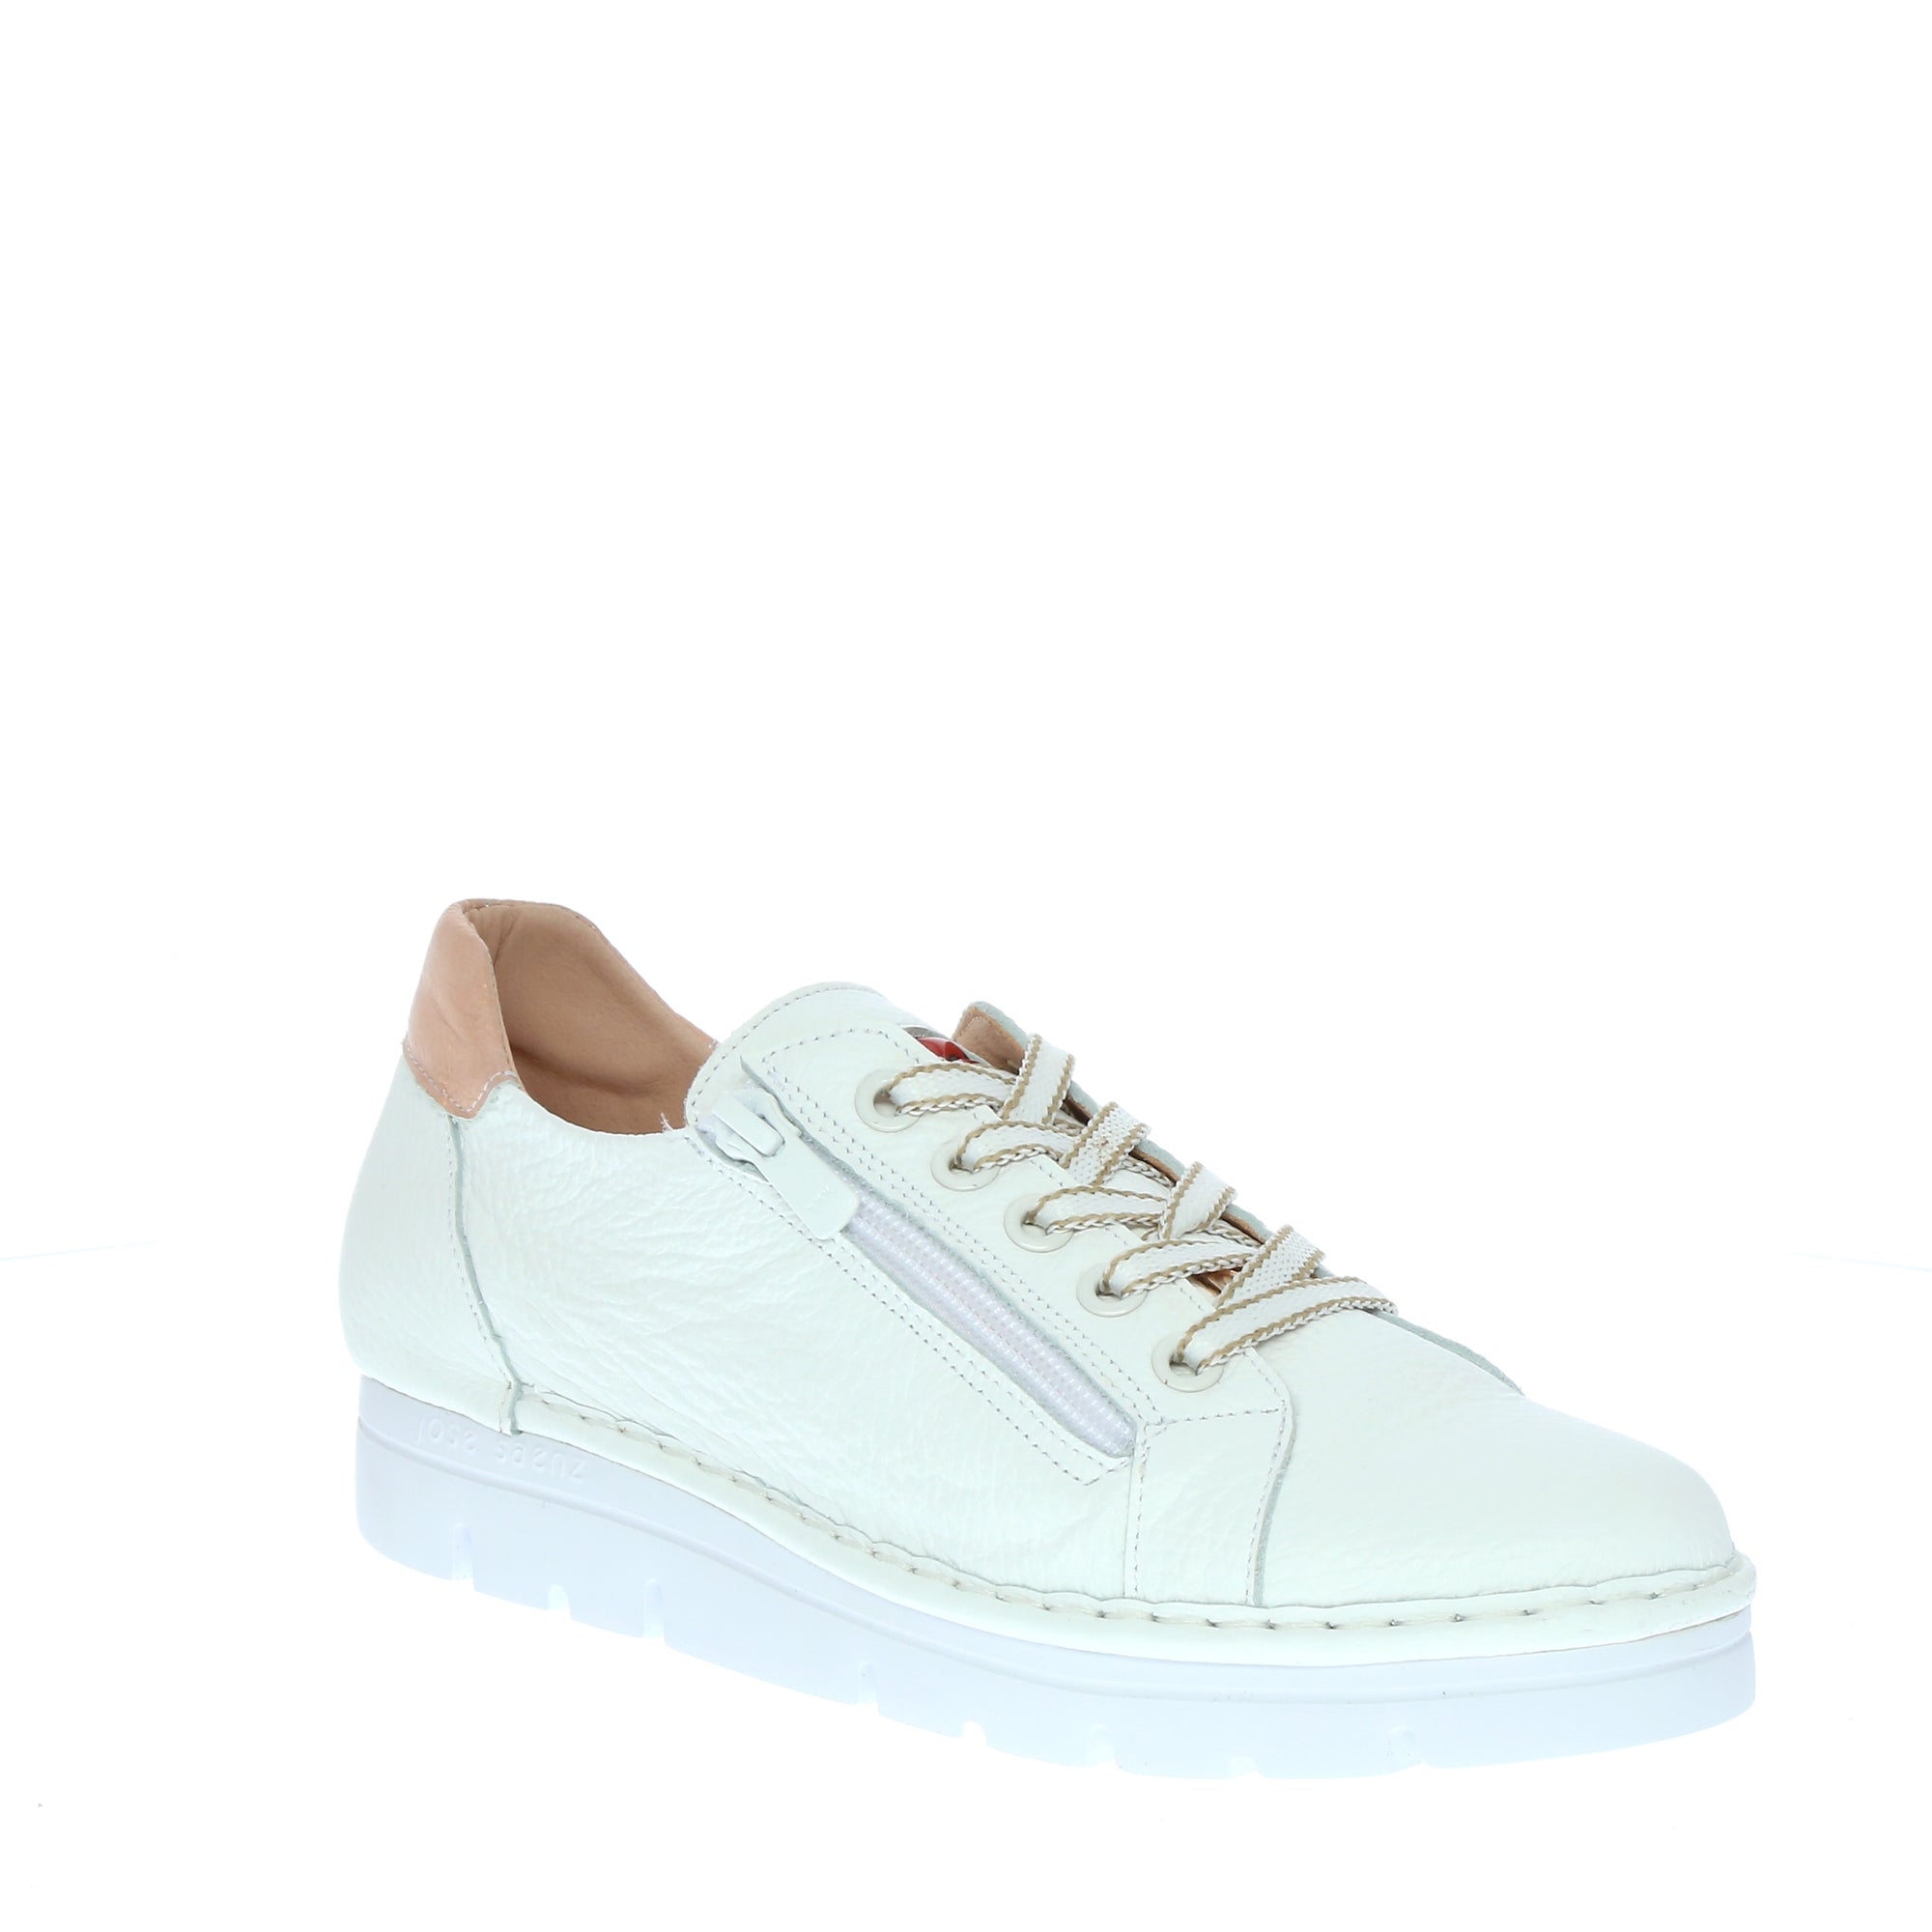 Parallel Culture Shoes and Fashion Online SNEAKERS JOSE SAENZ LADY SNEAKER - BLANCO/NUDE